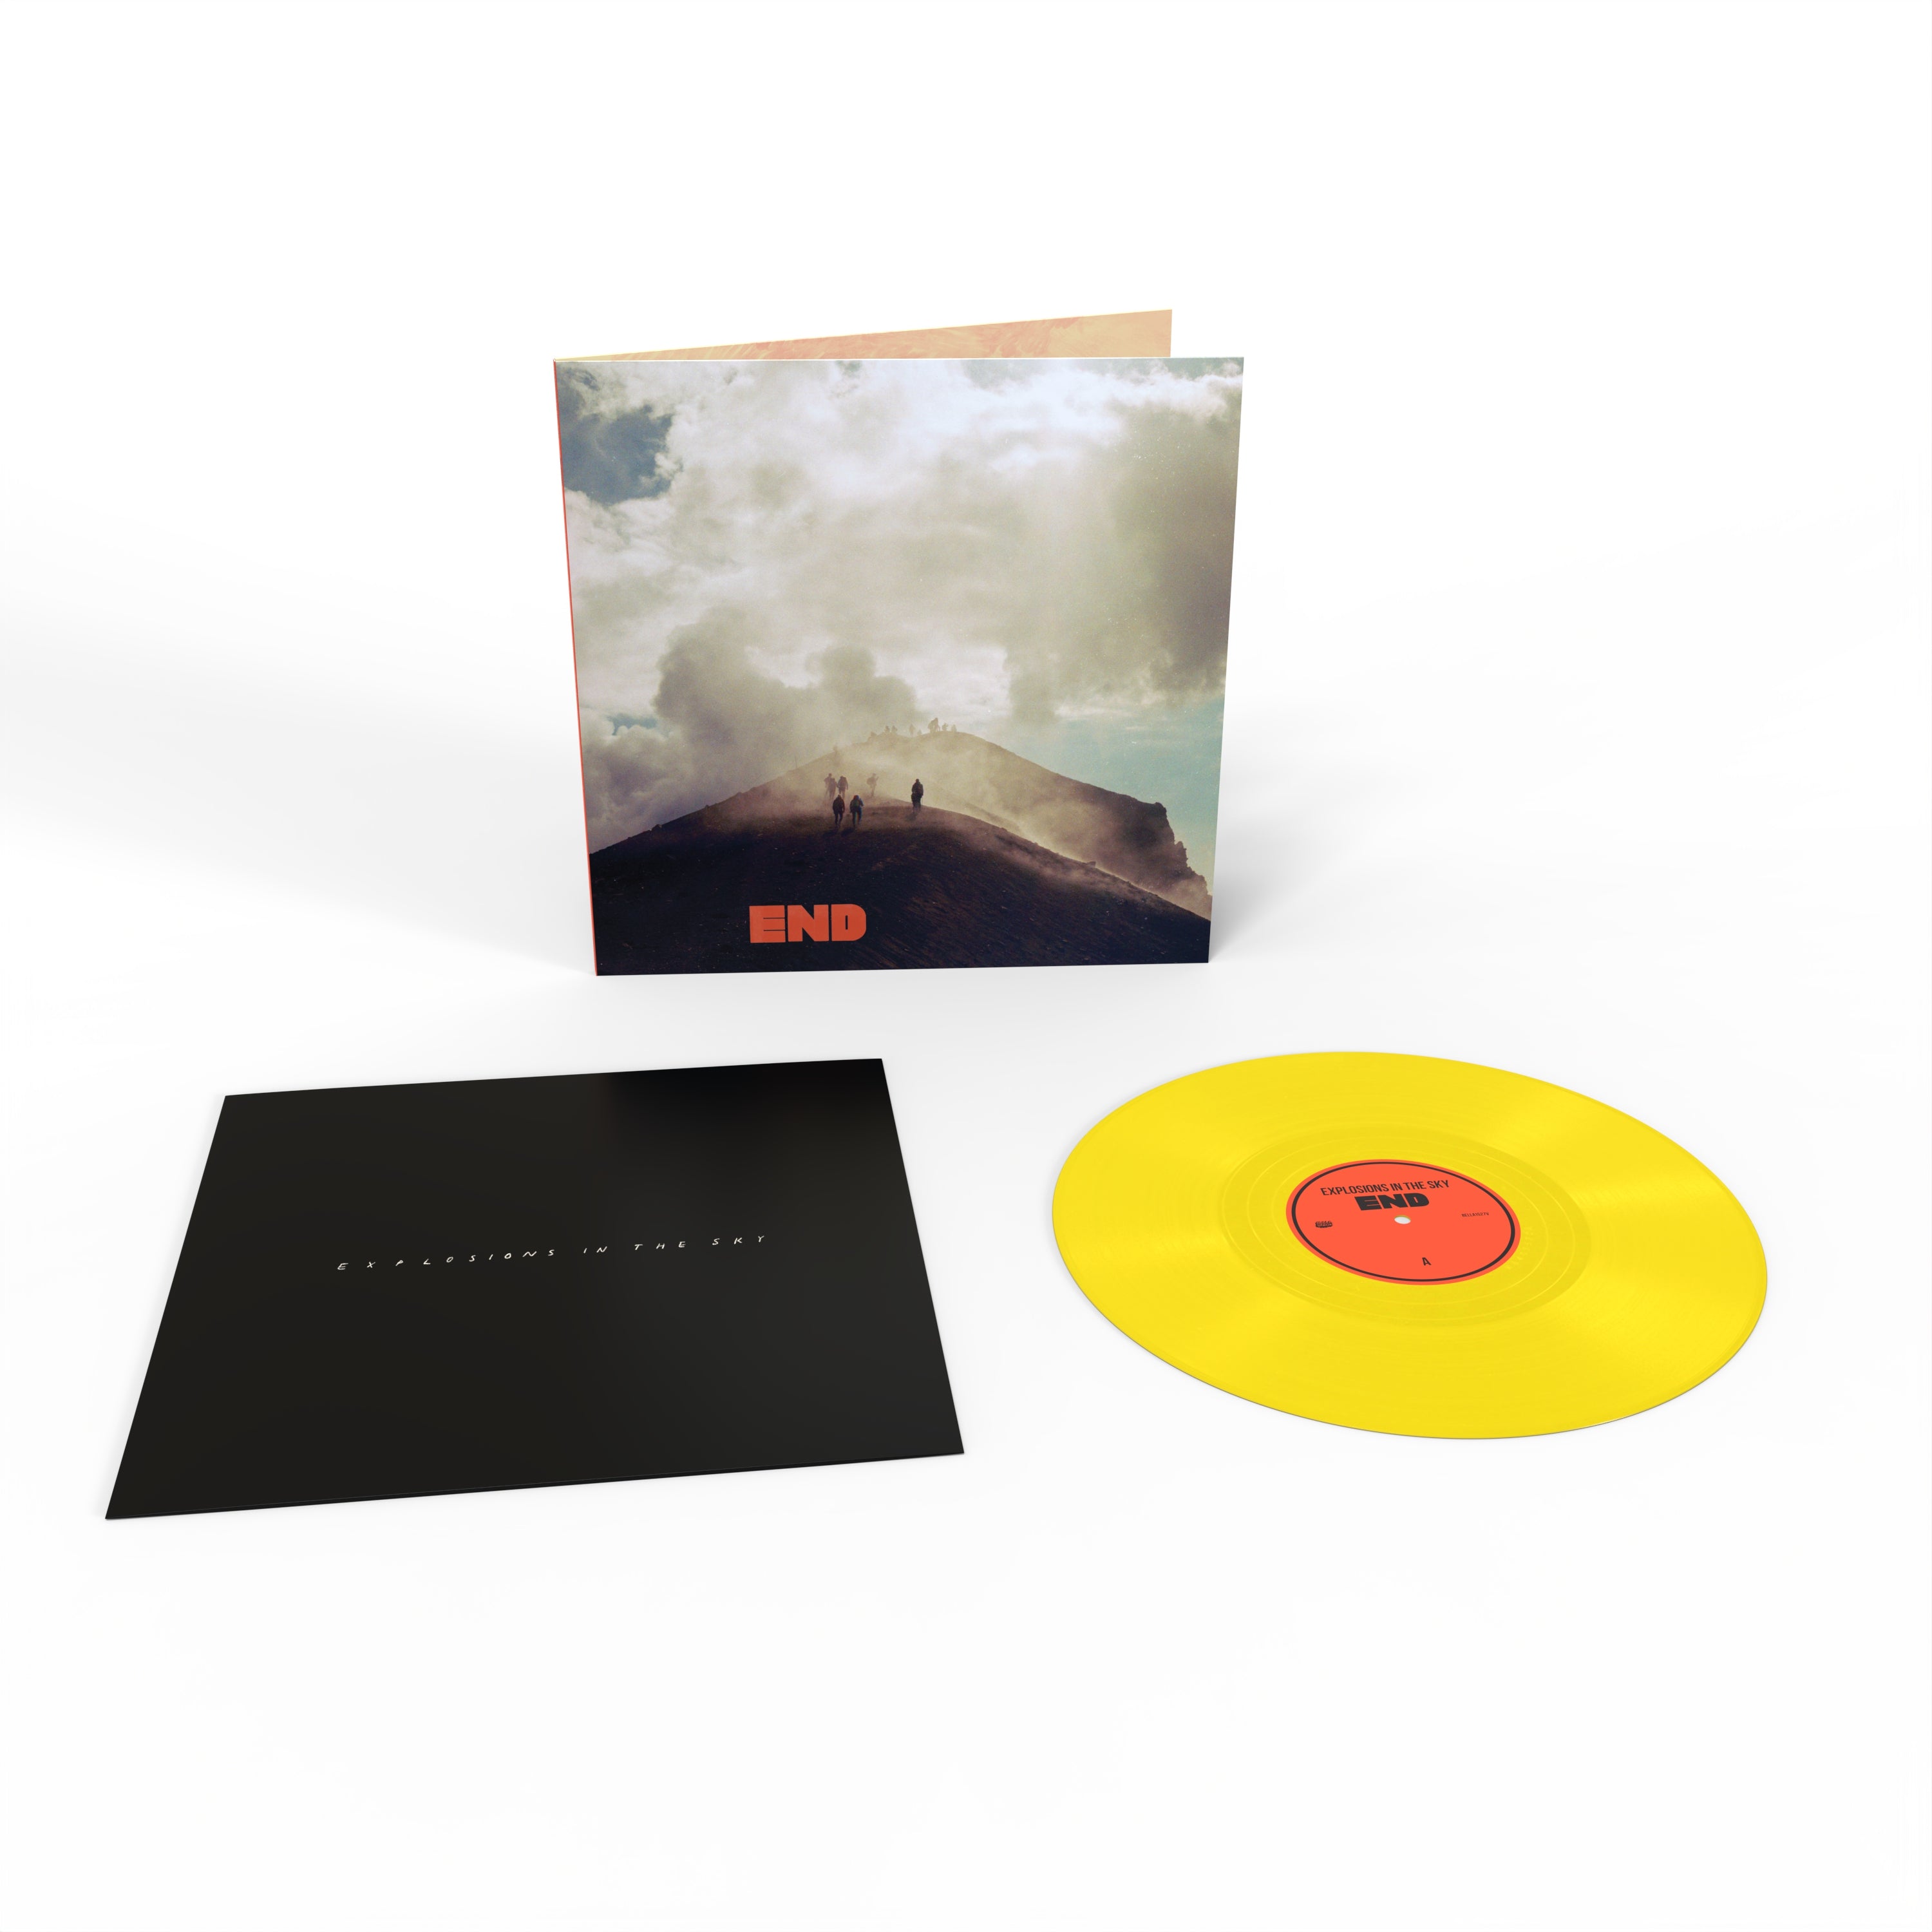 Explosions In The Sky - End: Limited Yellow Vinyl LP